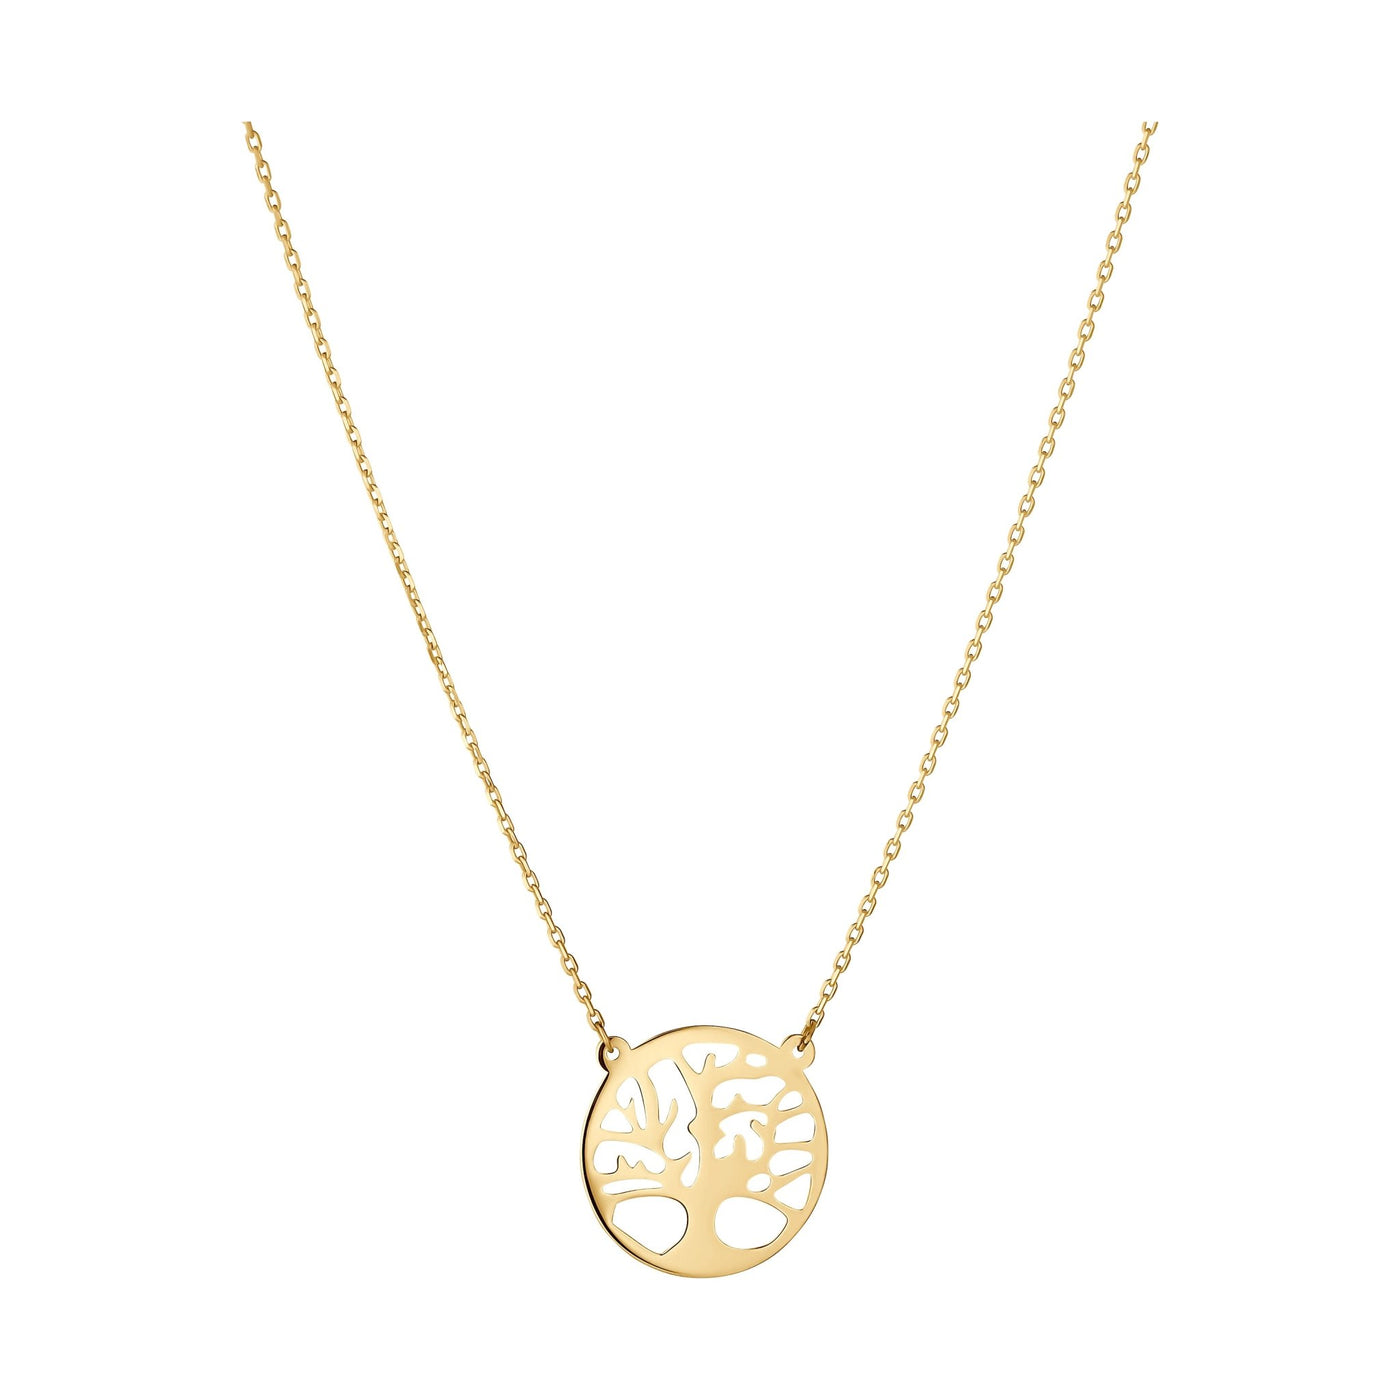 TREE OF LIFE NECKLACE 333 GOLD - IDENTIM®